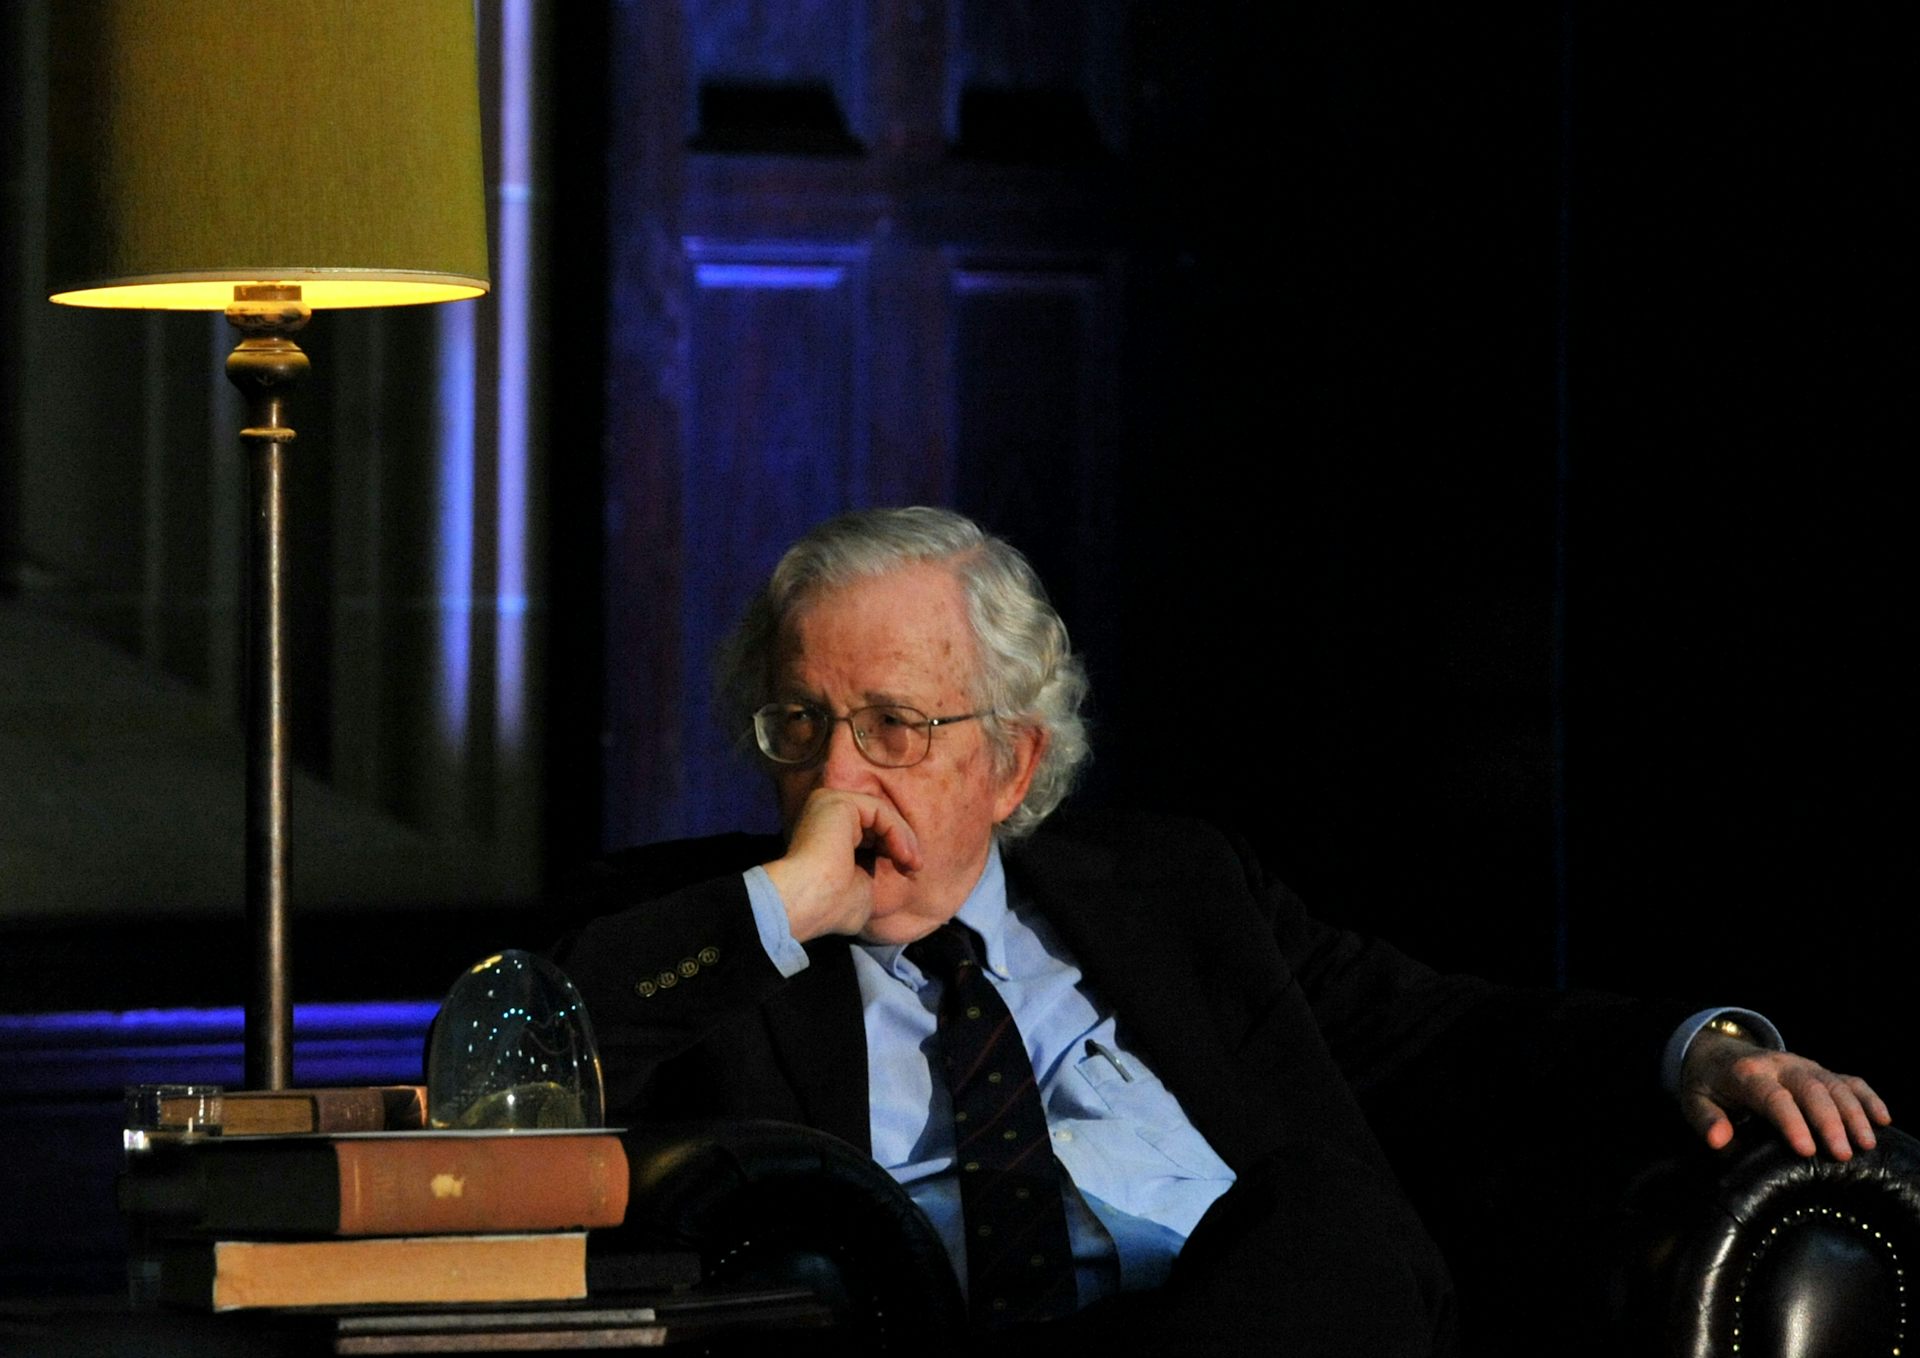 Does the impact of AI on social justice keep Noam Chomsky up at night as he turns 95?